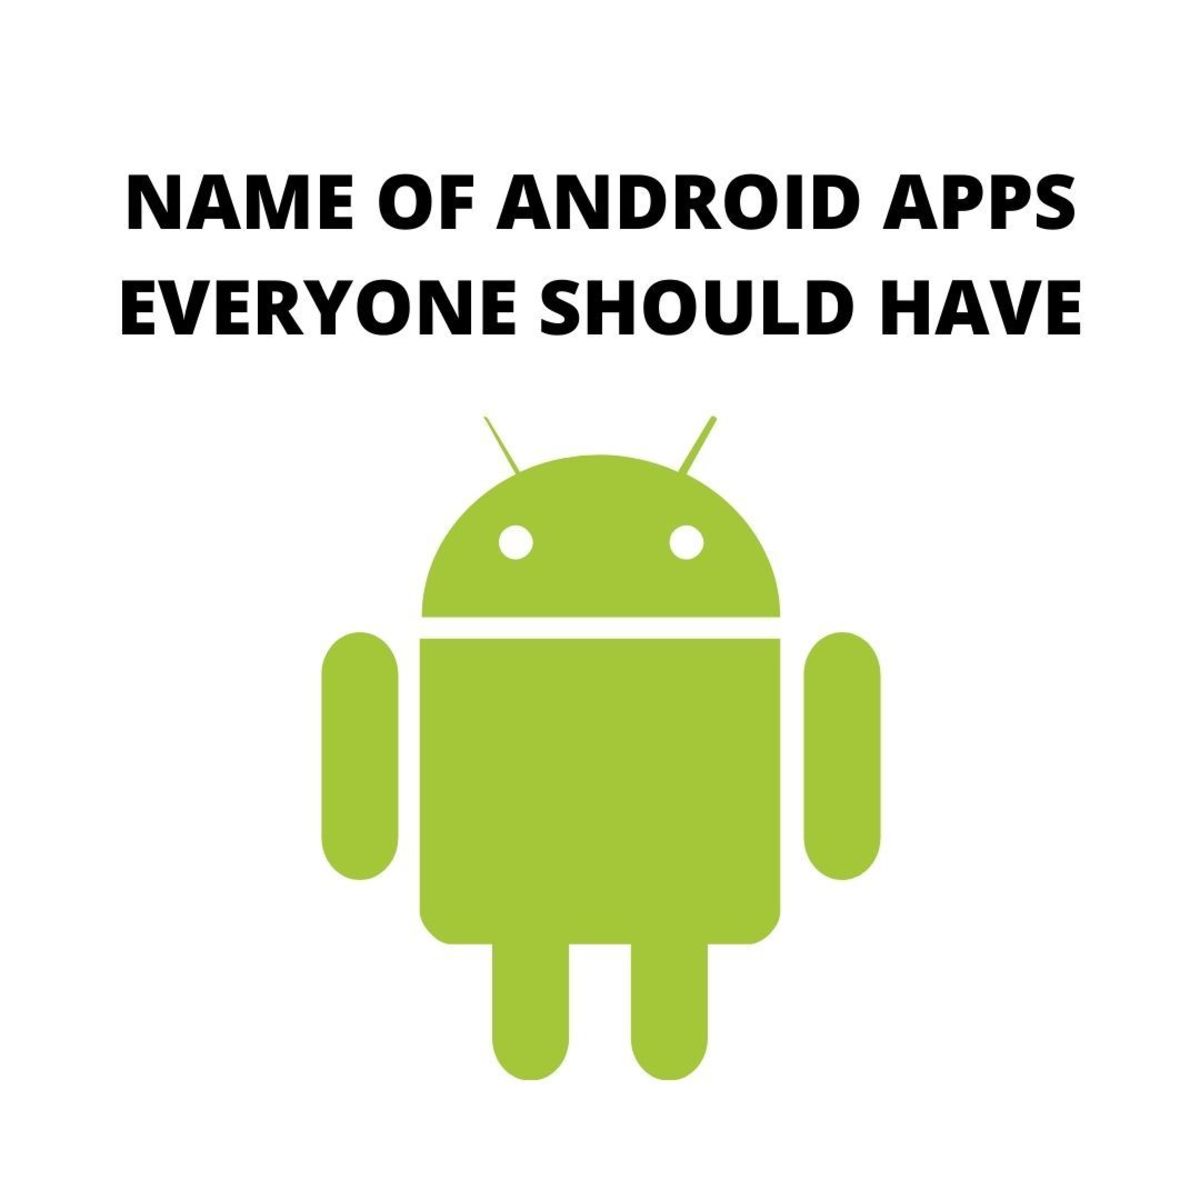 name-of-android-apps-everyone-should-have